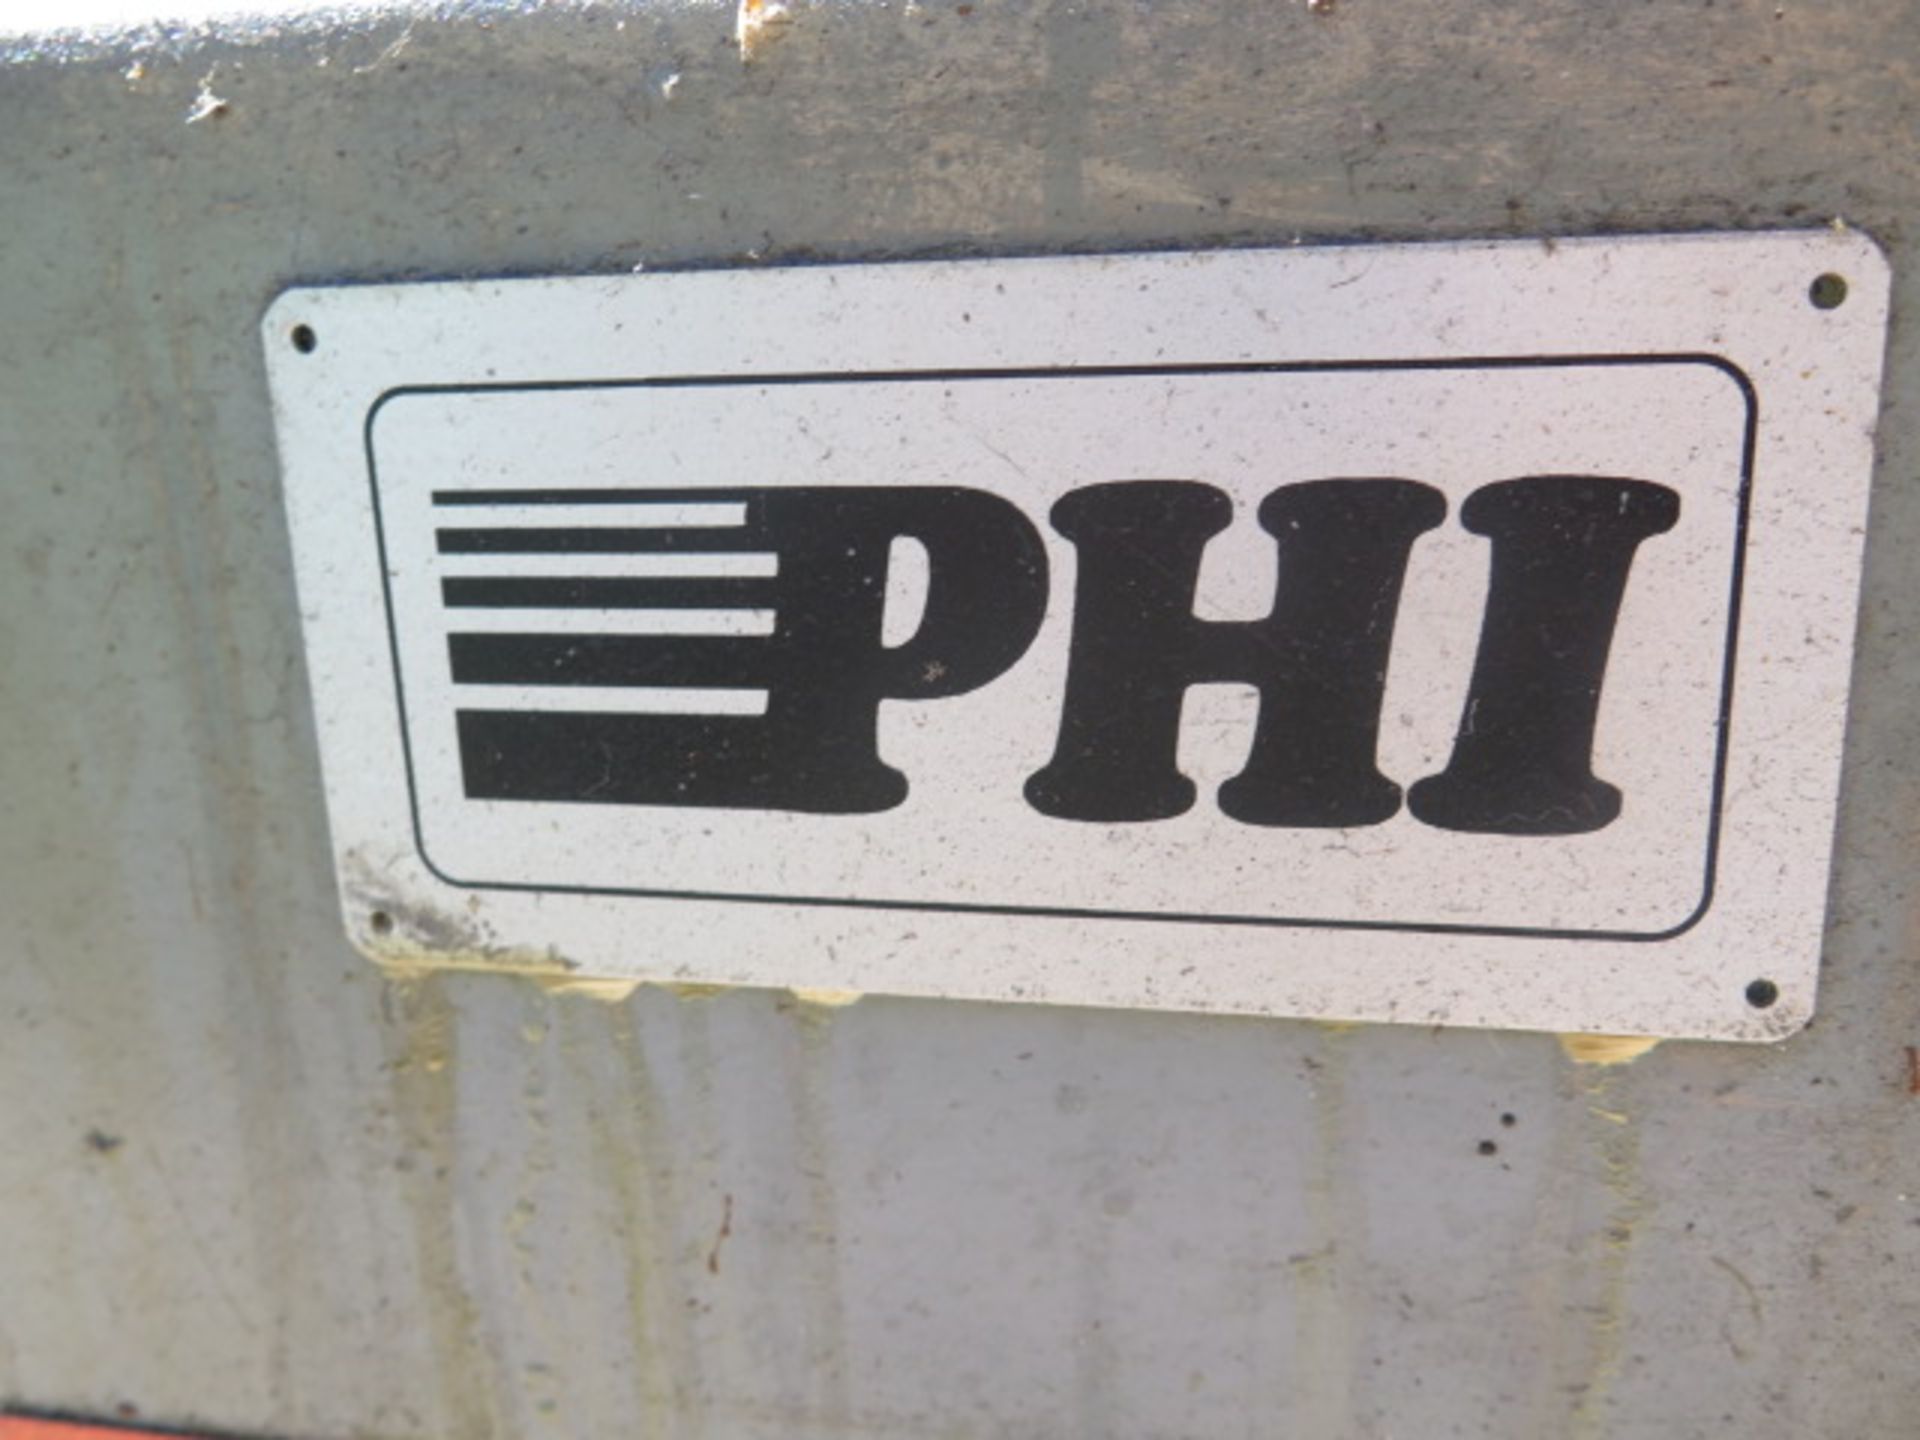 PHI mdl. 215H 4000 PSI Hydraulic Test Stand s/n 88-1-002 (SOLD AS-IS - NO WARRANTY) - Image 6 of 8